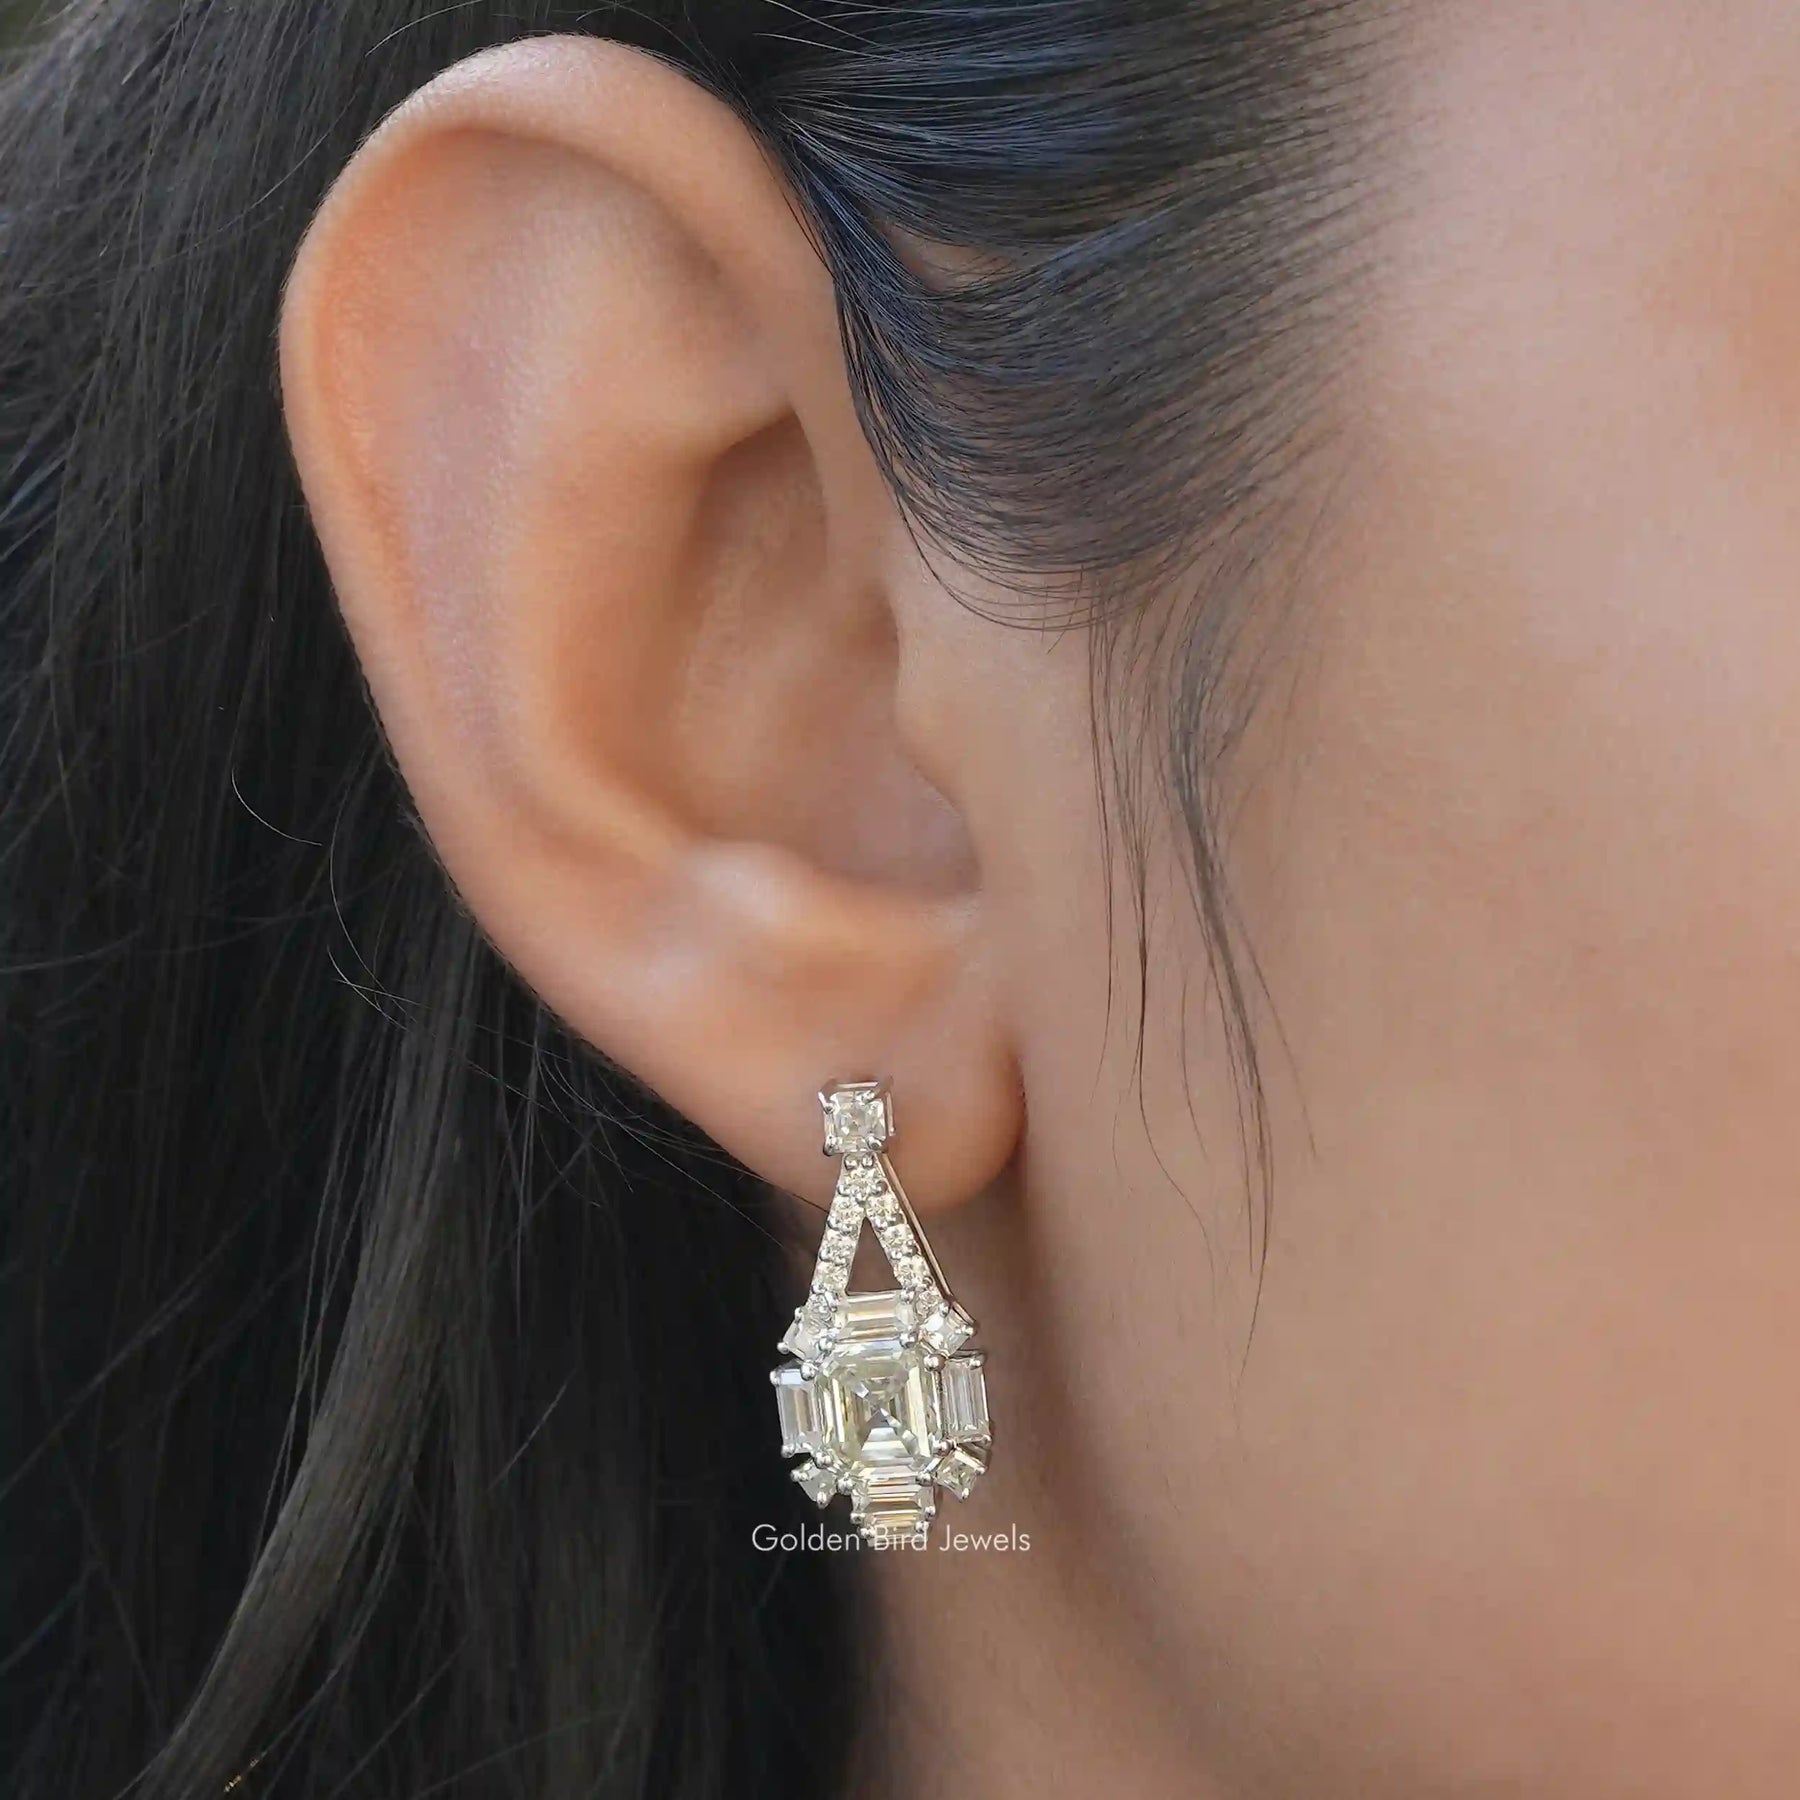 [This dangle earrings set in asscher cut stone and white gold]